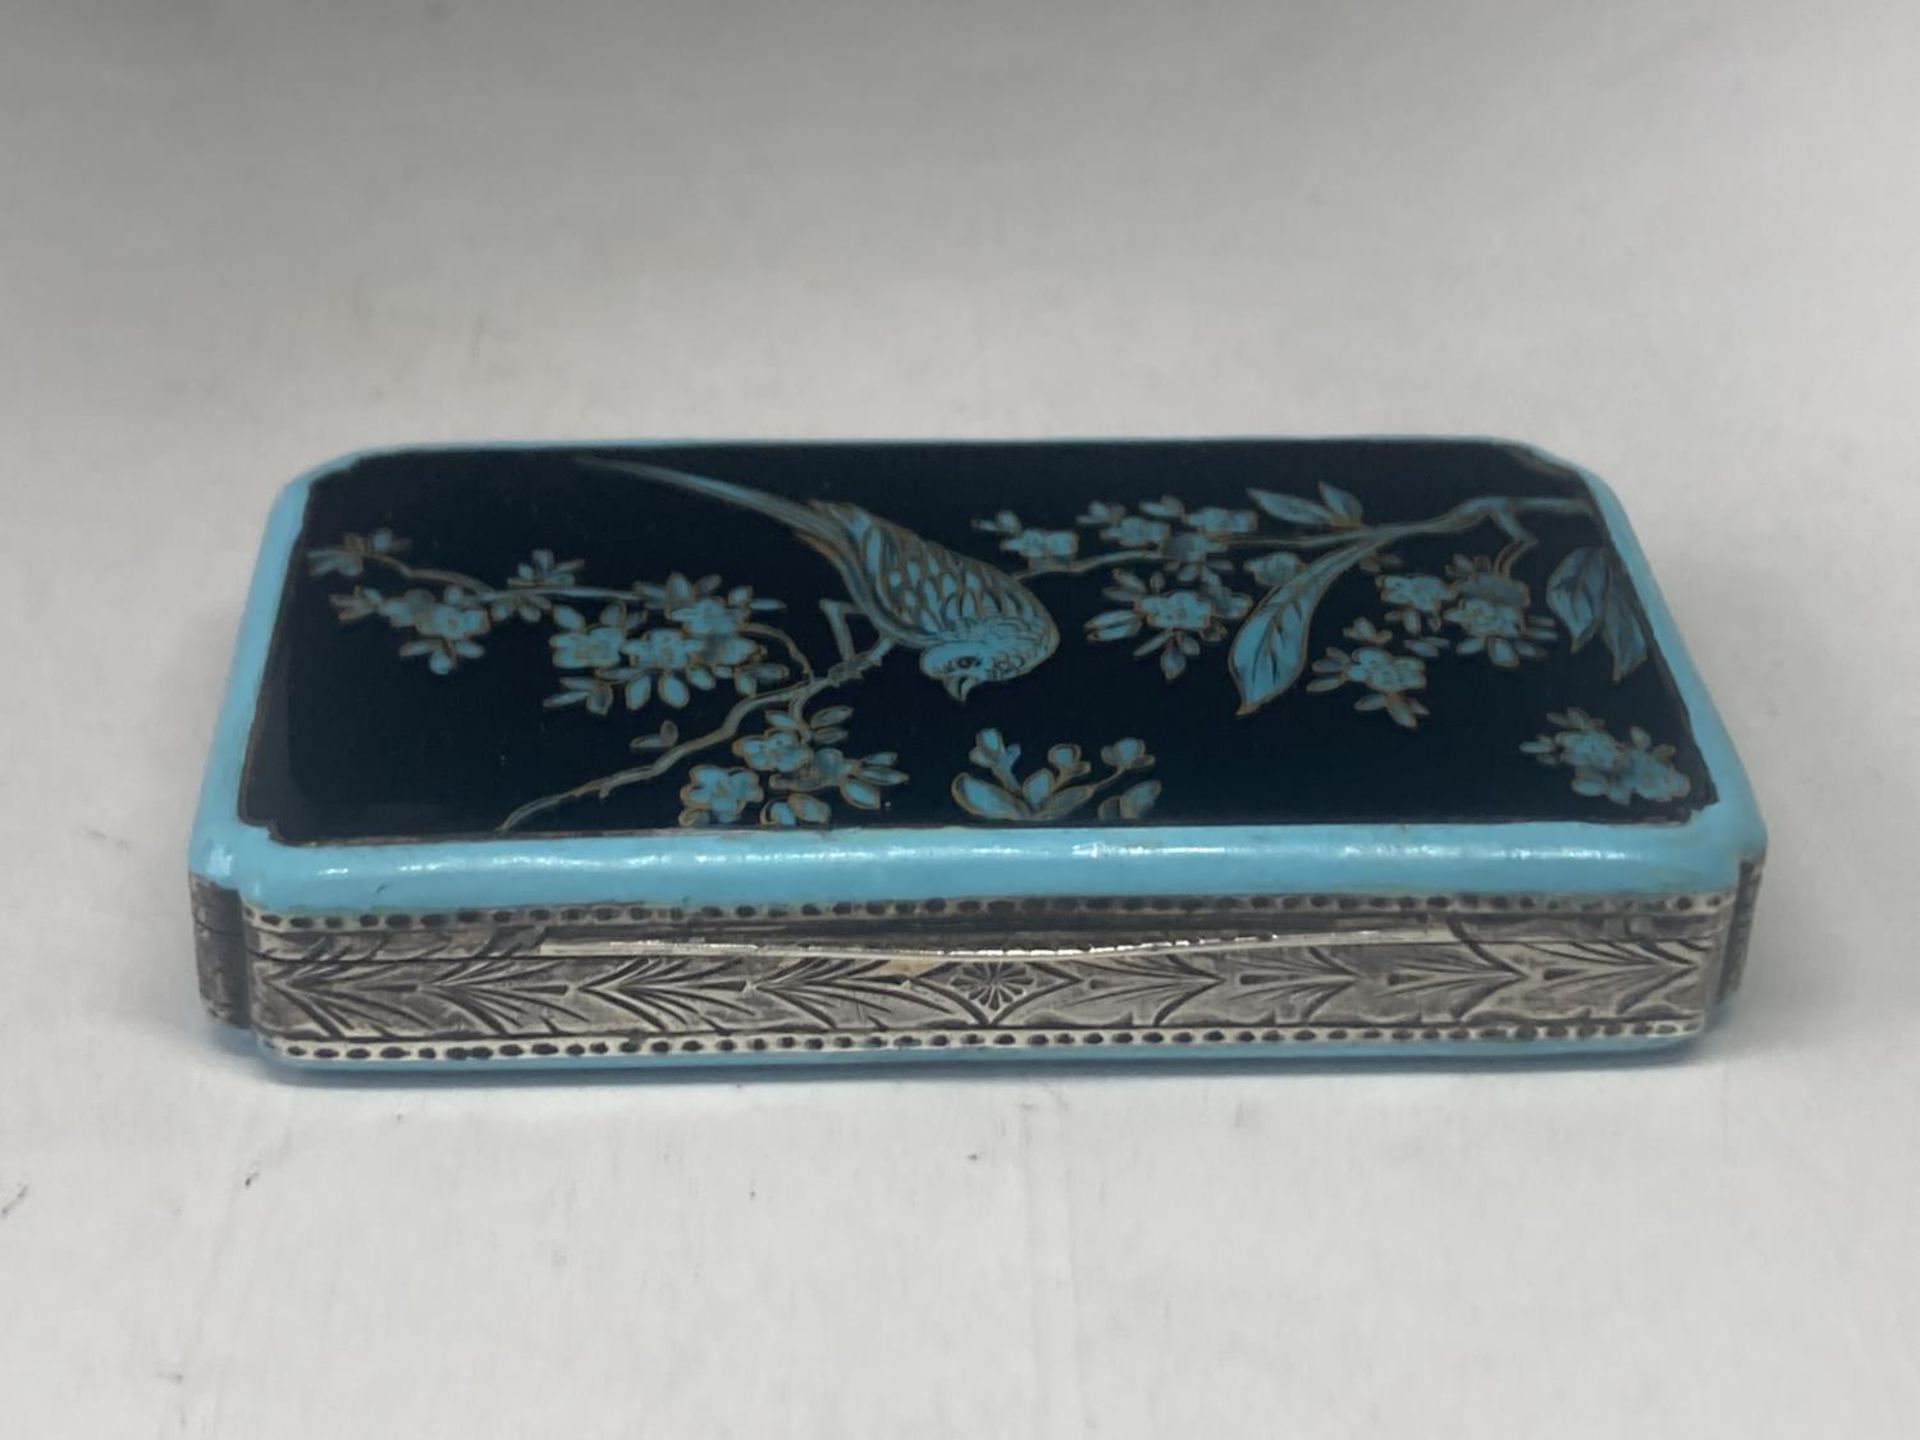 A SILVER AND ENAMEL TRINKET BOX WITH A TURQUOISE BLUE AND BLACK ORIENTAL BIRD DECORATION - Image 8 of 8